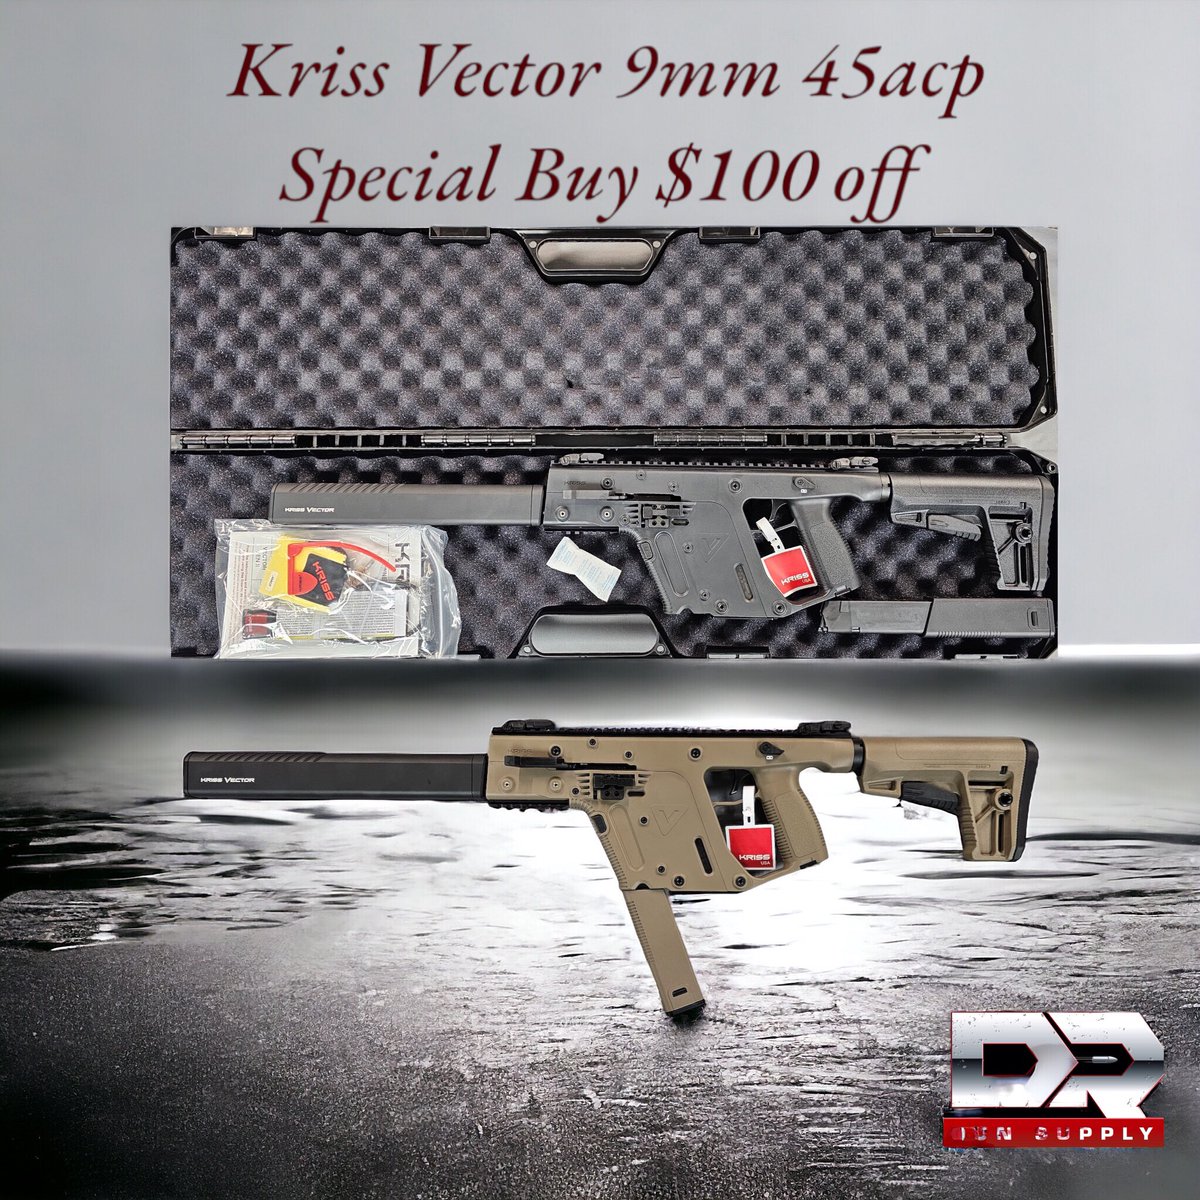 Get it in store while supplies last! 🔥
Store Hours:
Monday 12-6PM
Tuesday-Friday 10-6PM
Saturday 10-2PM
Sunday CLOSED
#okc #shoplocalokc #pewpewlife #military #guns #firearms #riflehunting  #gun #gunshow #weapons  #gunsandammo #tactical #shooting #gunporn #pewpew #mm #saywhen